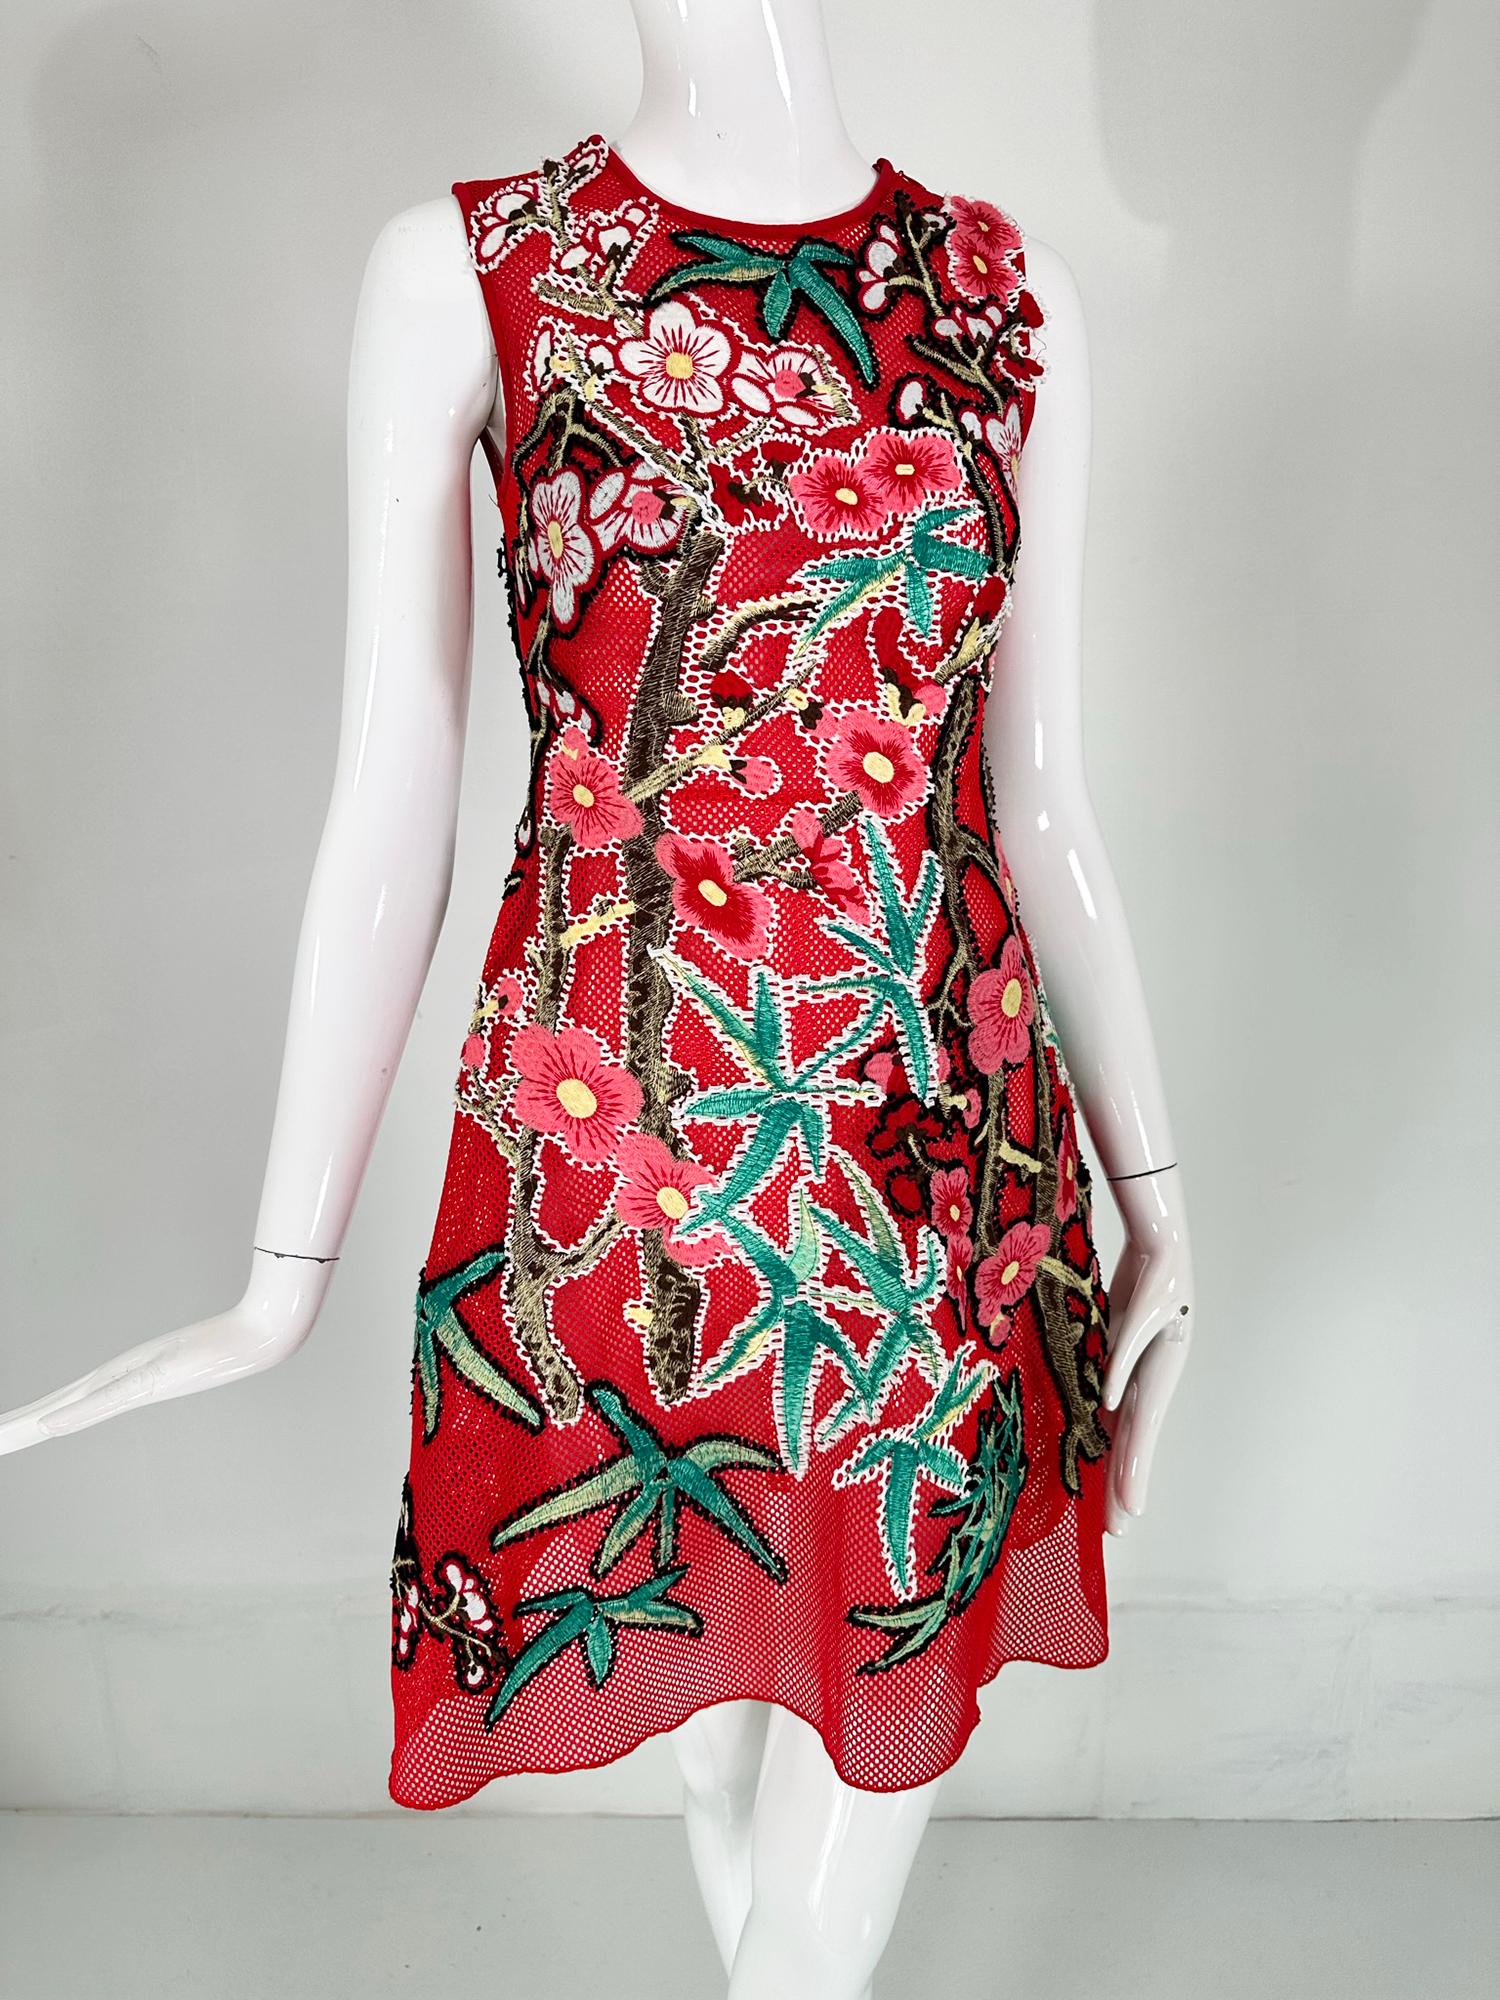 Vivienne Tam abstract red applique mesh dress XS. Jewel neck, sleeveless dress of open red mesh that is appliqued with abstract shapes that may remind you of star fish & and flowers. Bright & colourful the dress is a little work of art. Fitted